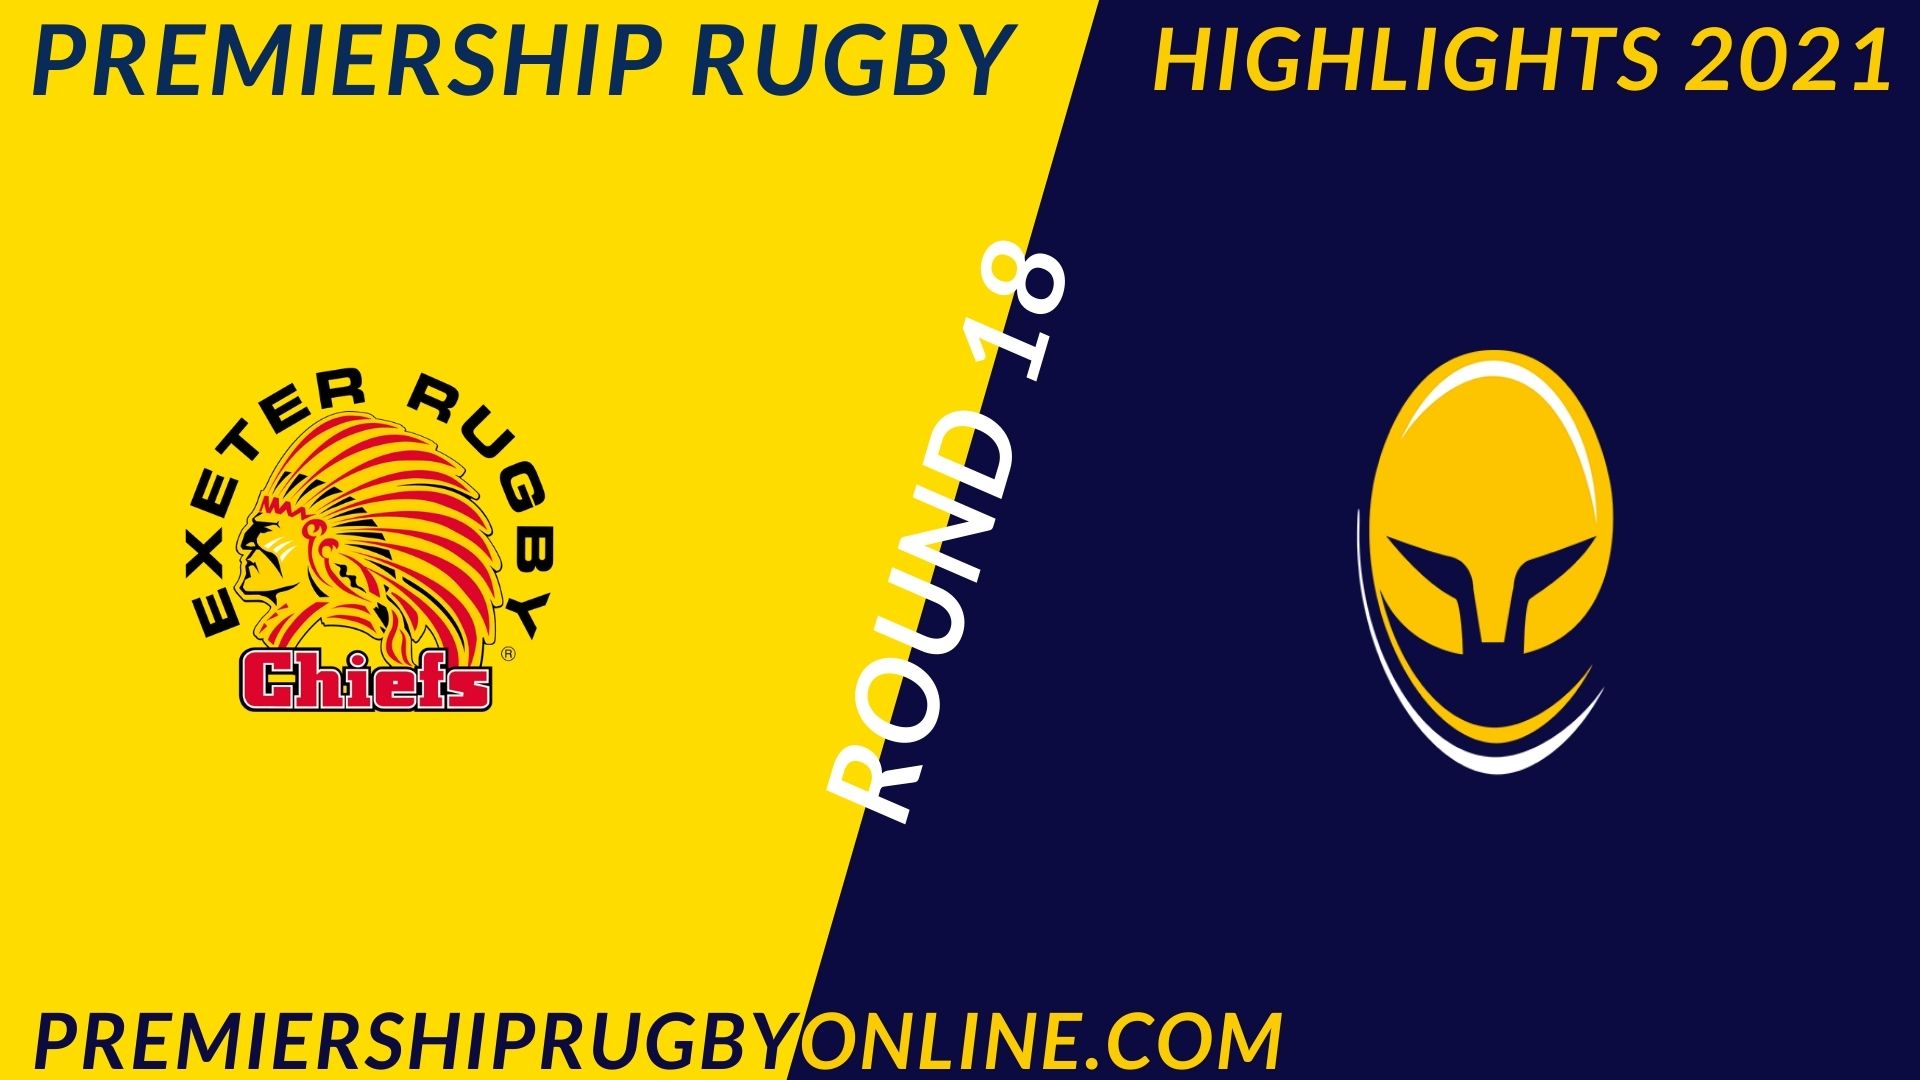 Exeter Chiefs Vs Worcester Warriors Highlights 2021 RD 18